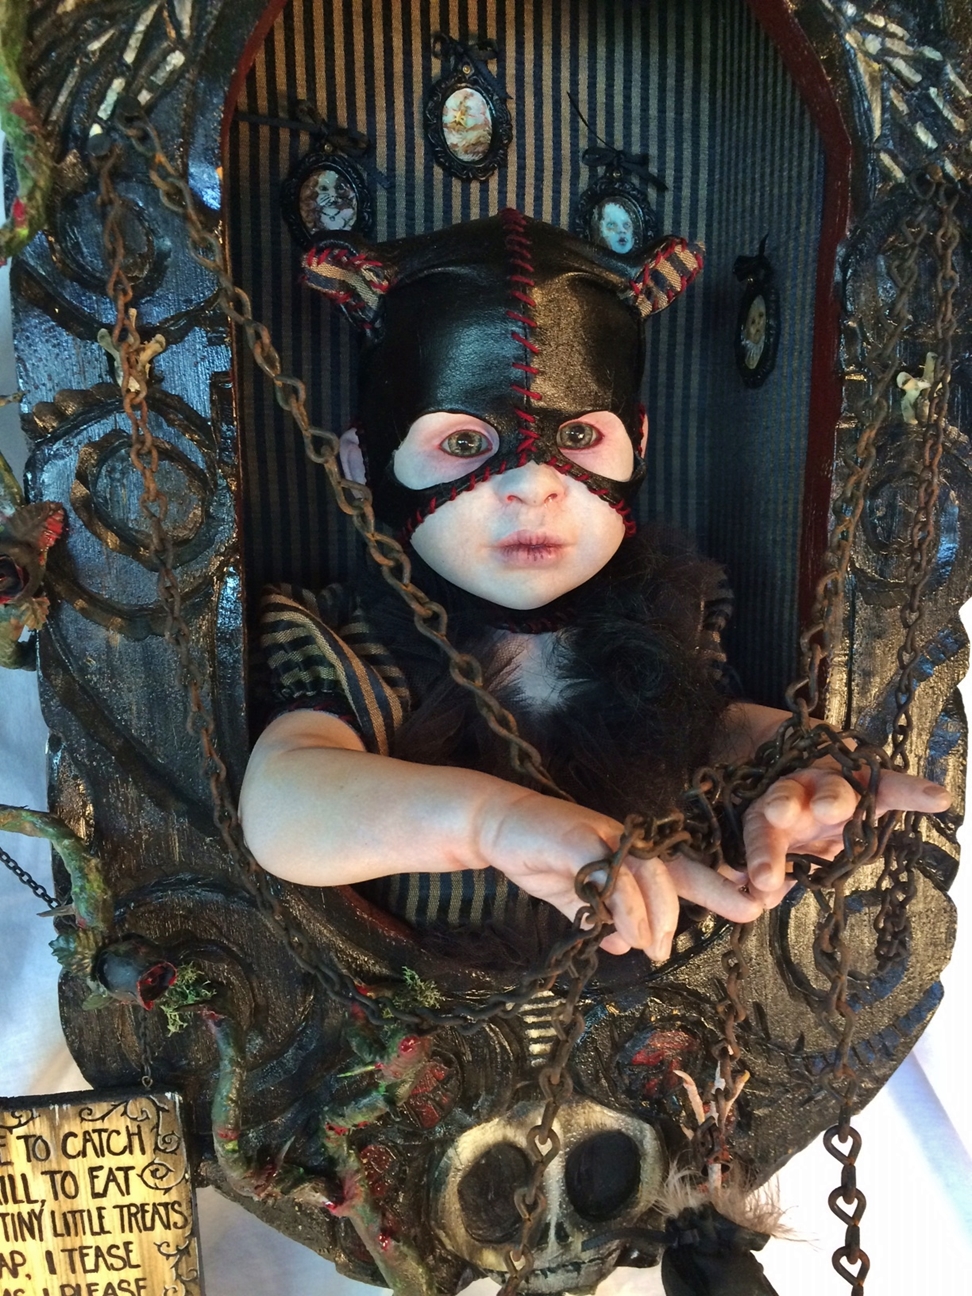 close-up of gothic artdoll wearing black leather cat mask holding chains inside carved shadowbox with skull